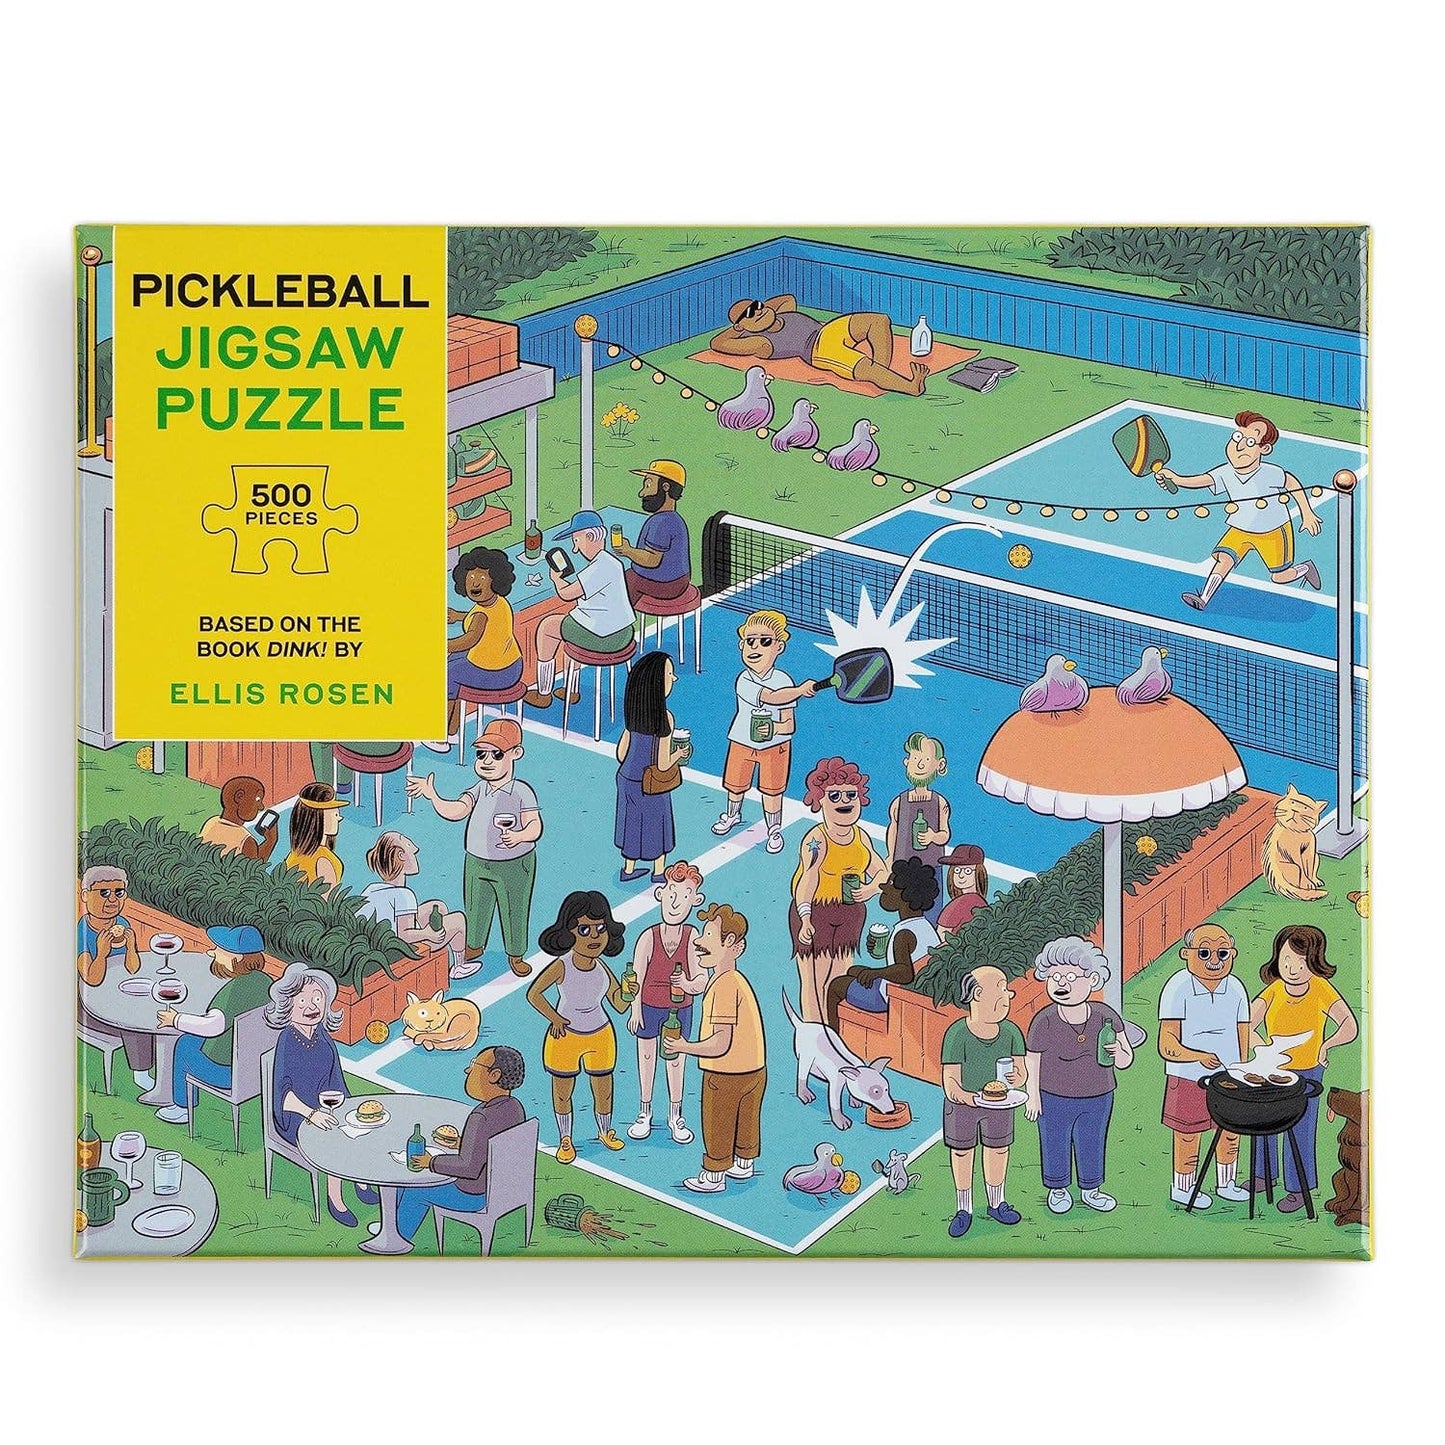 Pickleball Jigsaw Puzzle: Based on the Book Dink!